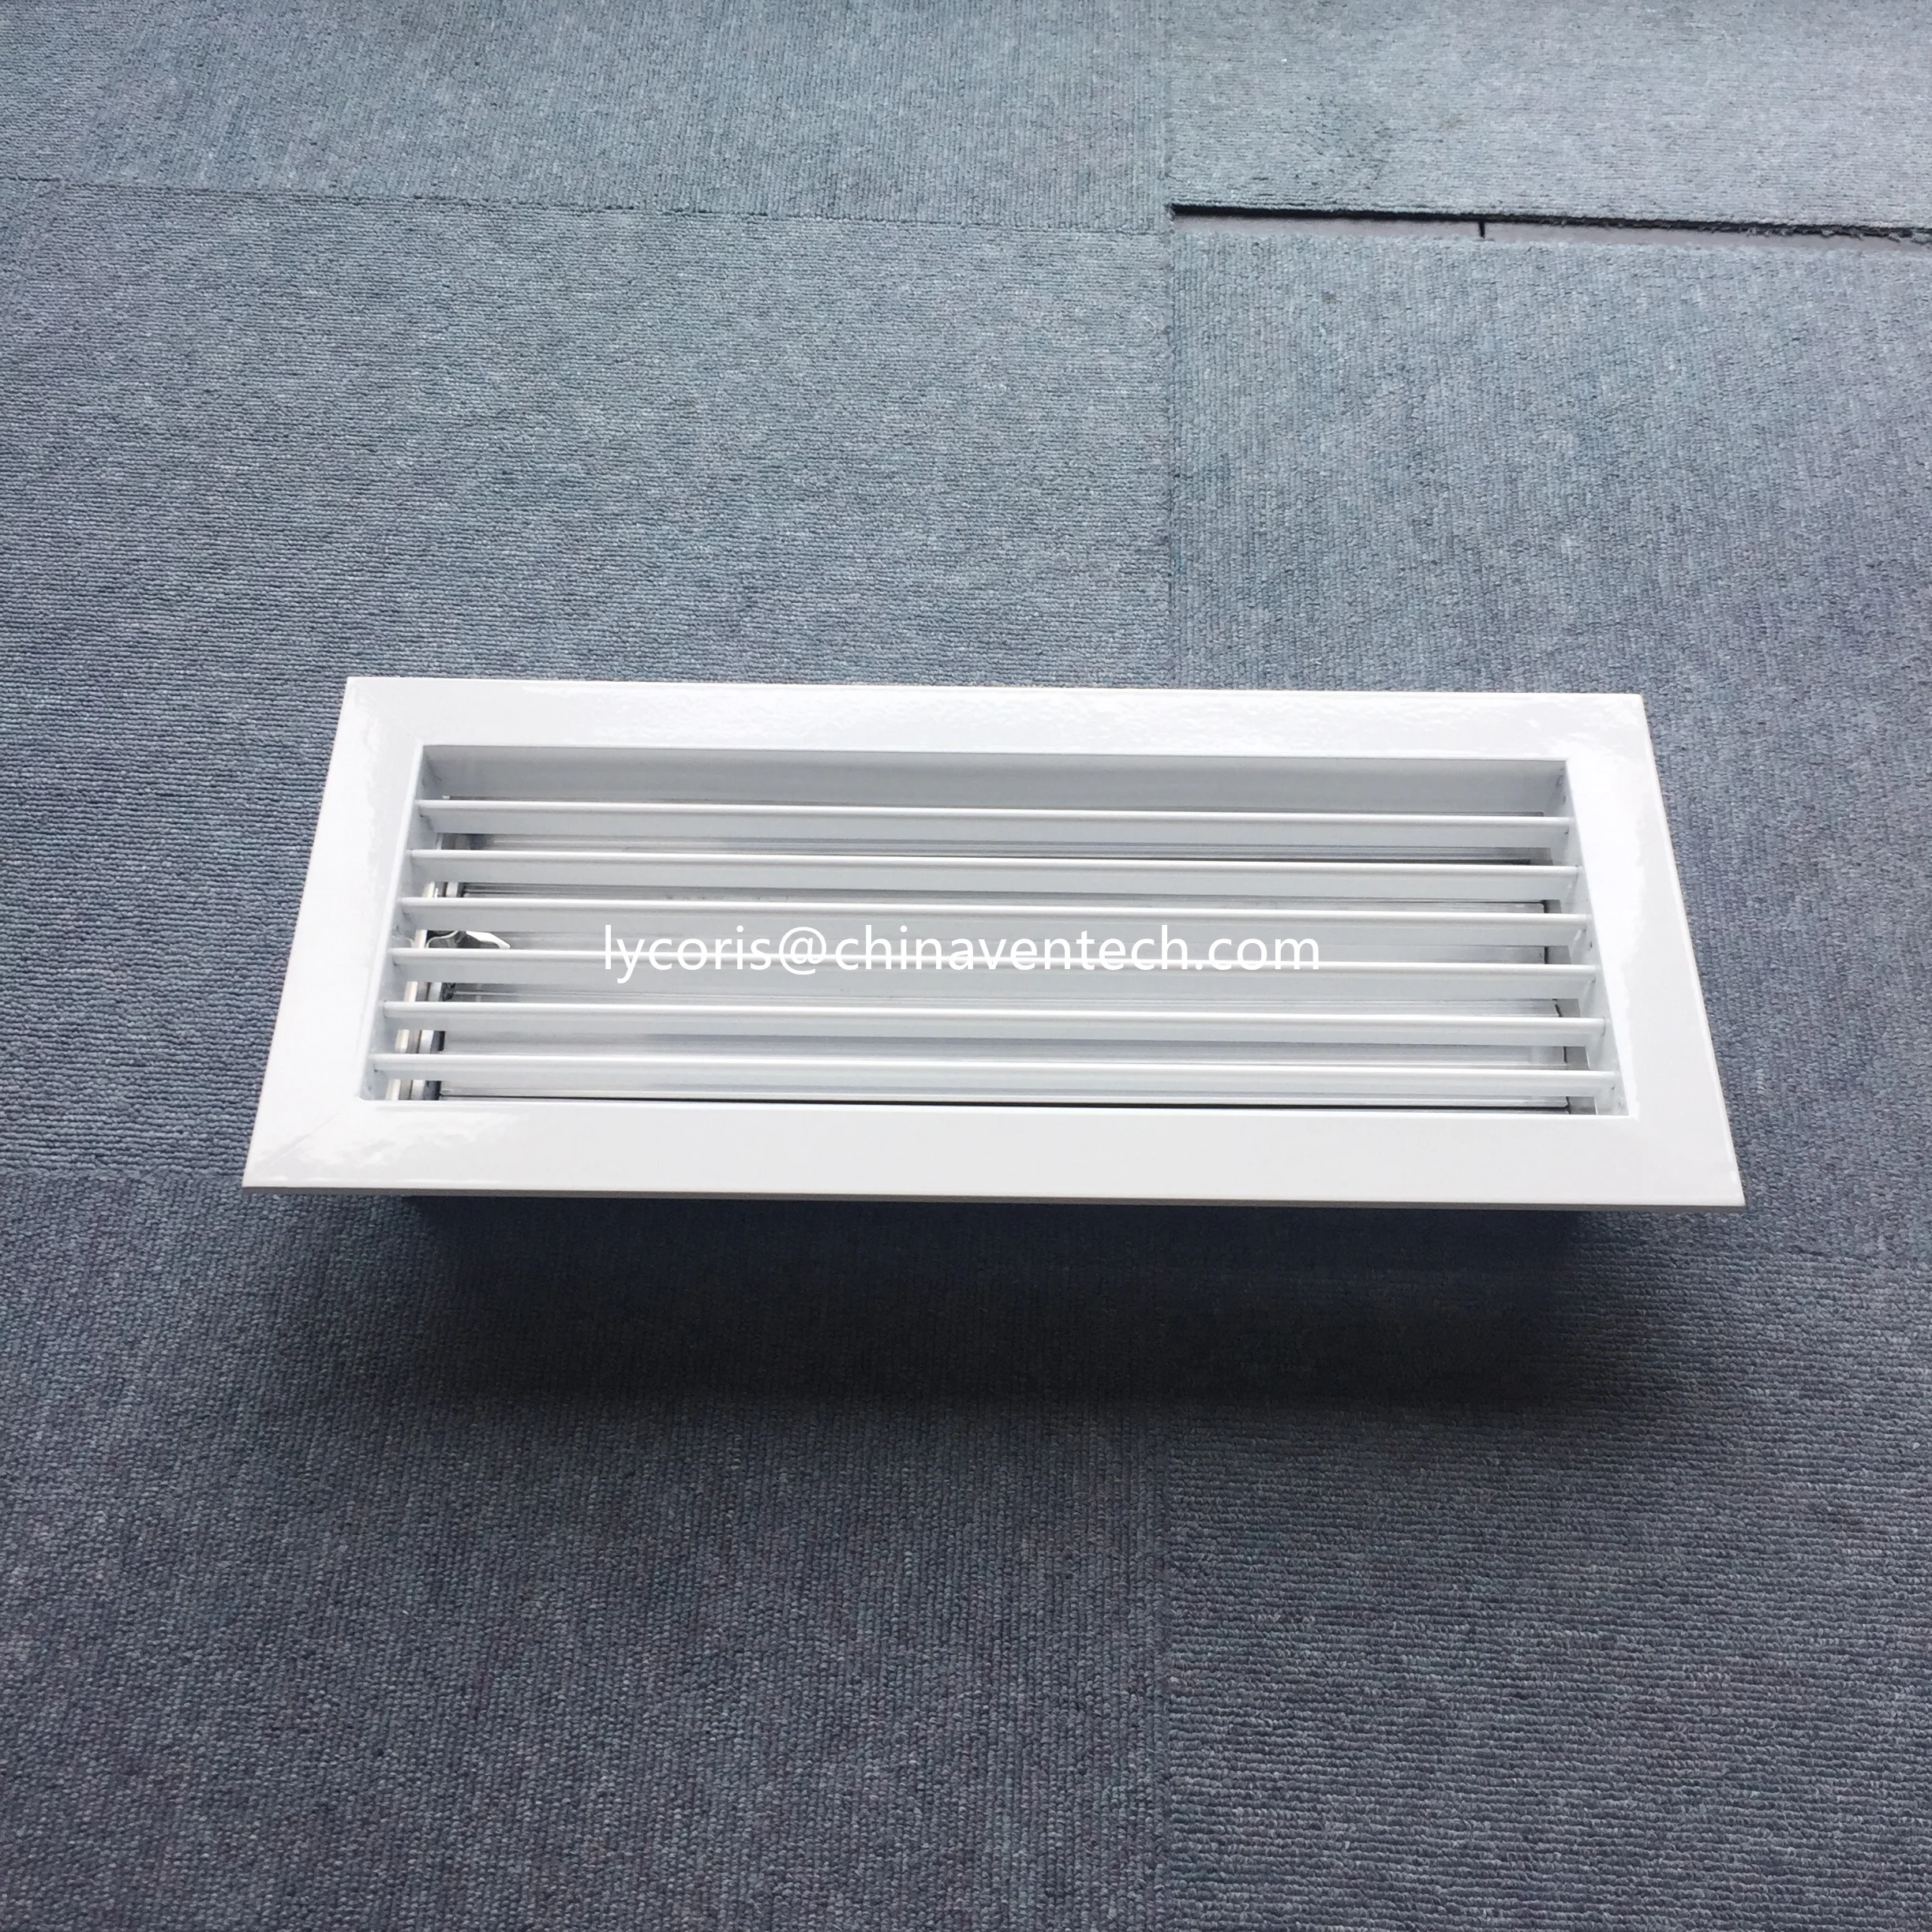 Ventech China air grille manufacturer sidewall return grille single deflection air grille